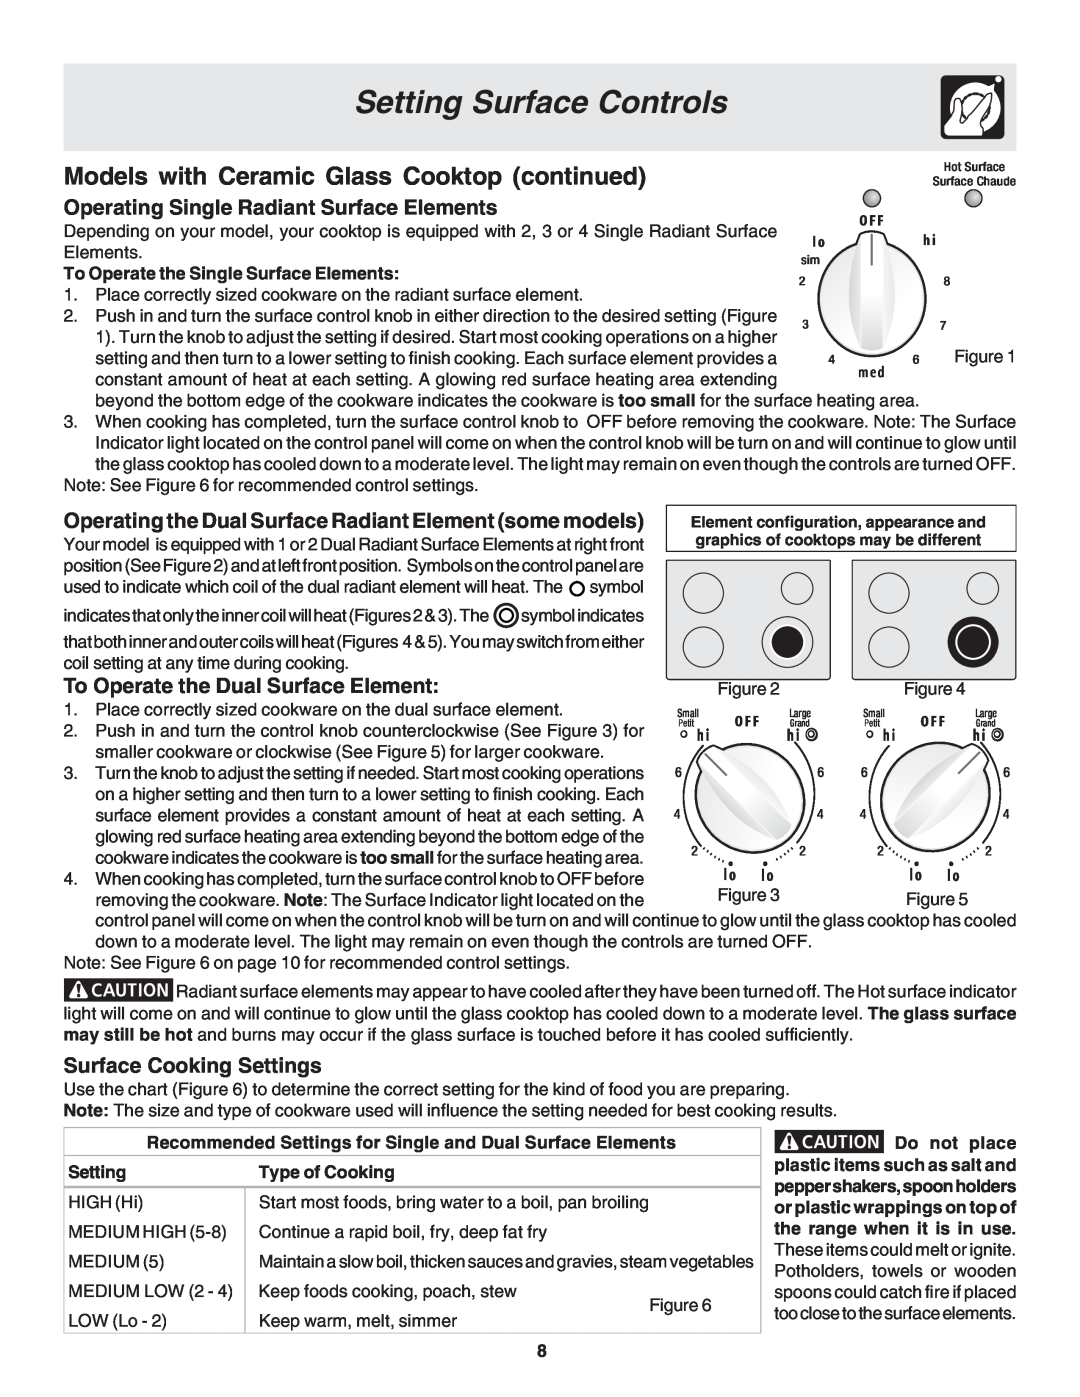 Frigidaire 318200439 Setting Surface Controls, Operating Single Radiant Surface Elements, Surface Cooking Settings 